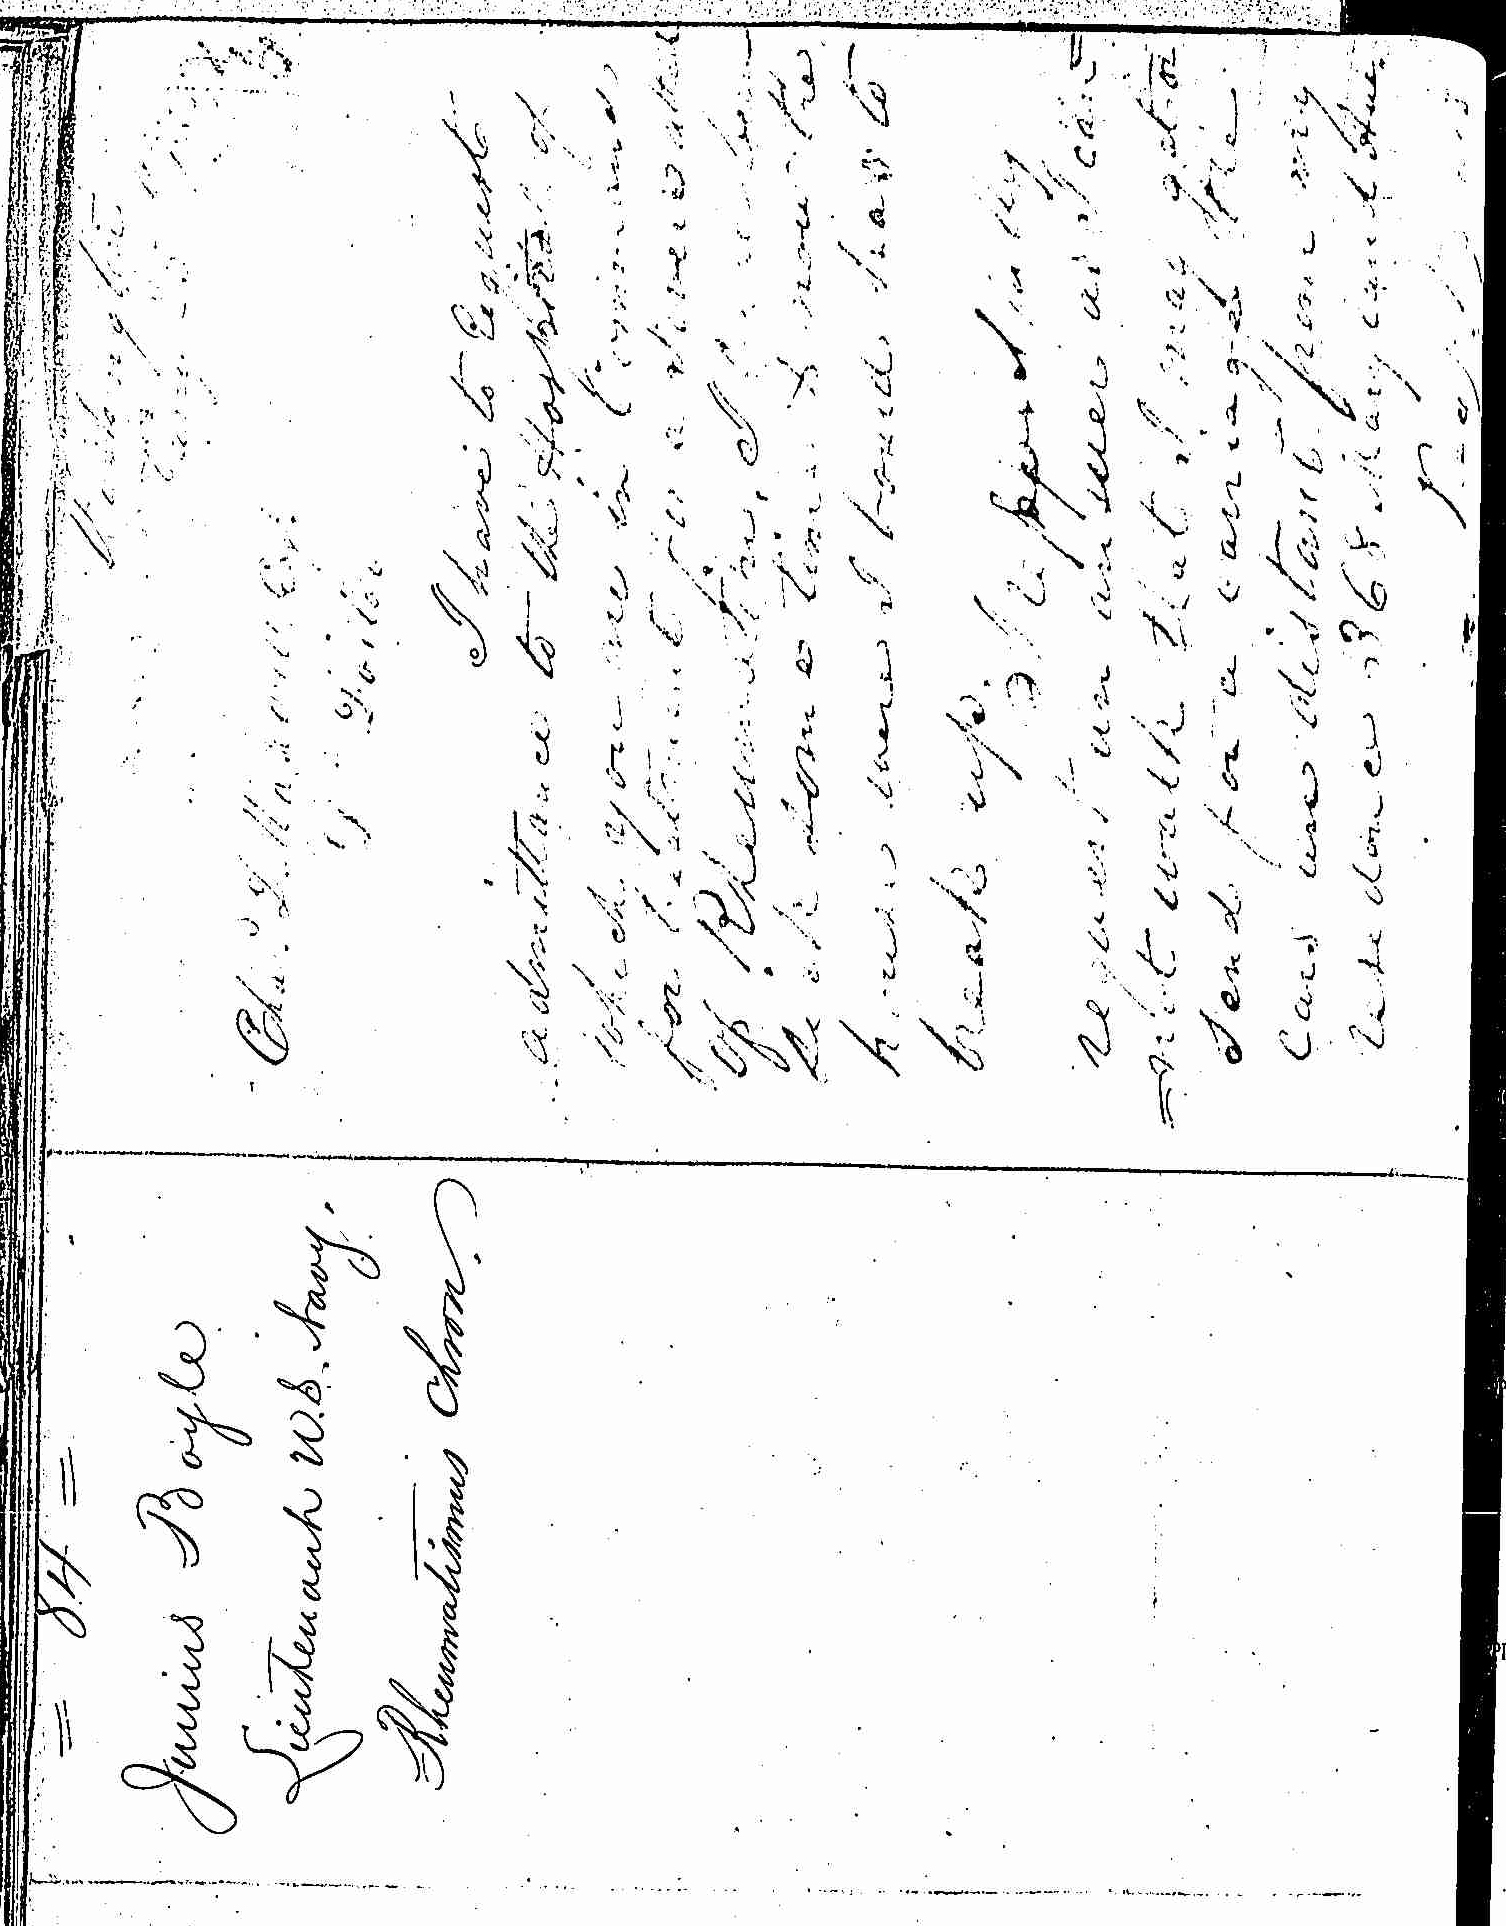 Entry for James Boyle (page 2 of 2) in the log Hospital Tickets and Case Papers - Naval Hospital - Washington, D.C. - 1865-68